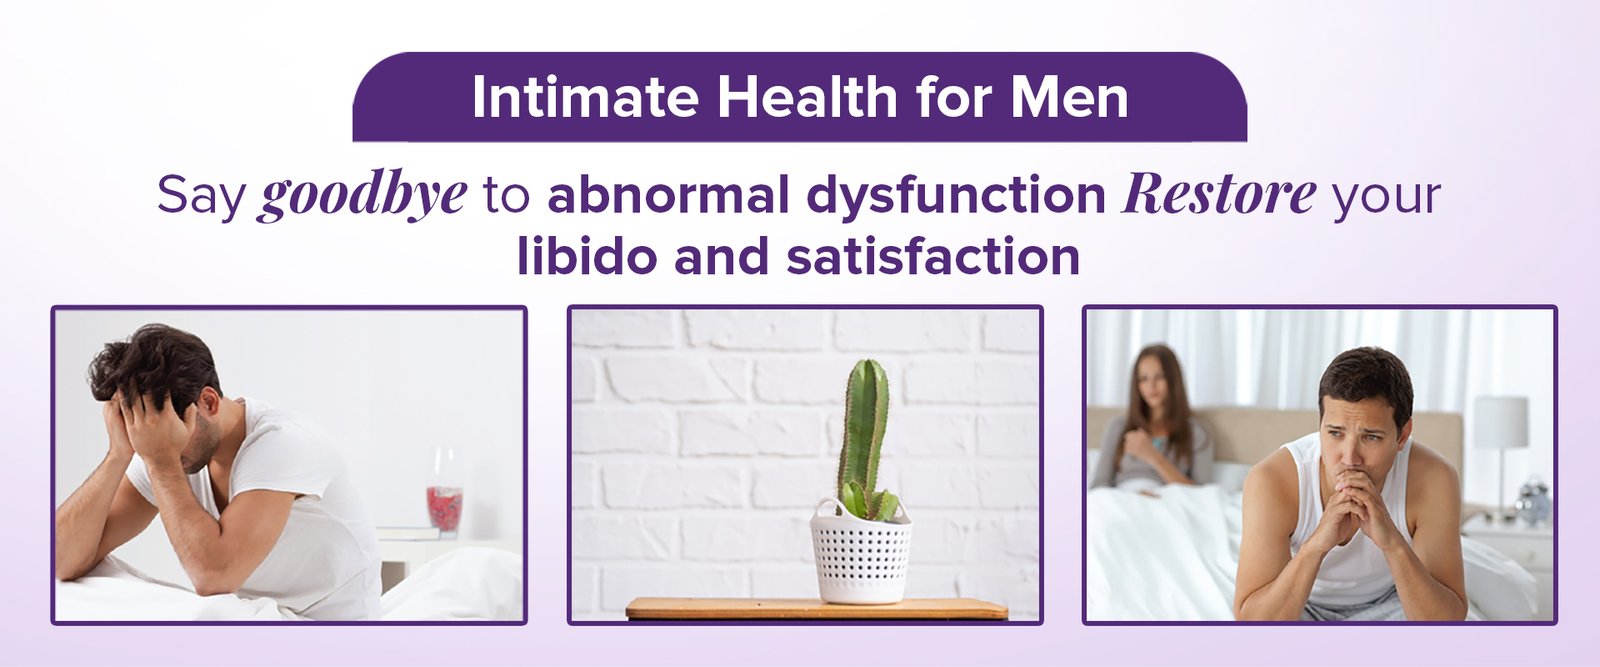 INTIMATE HEALTH FOR MEN